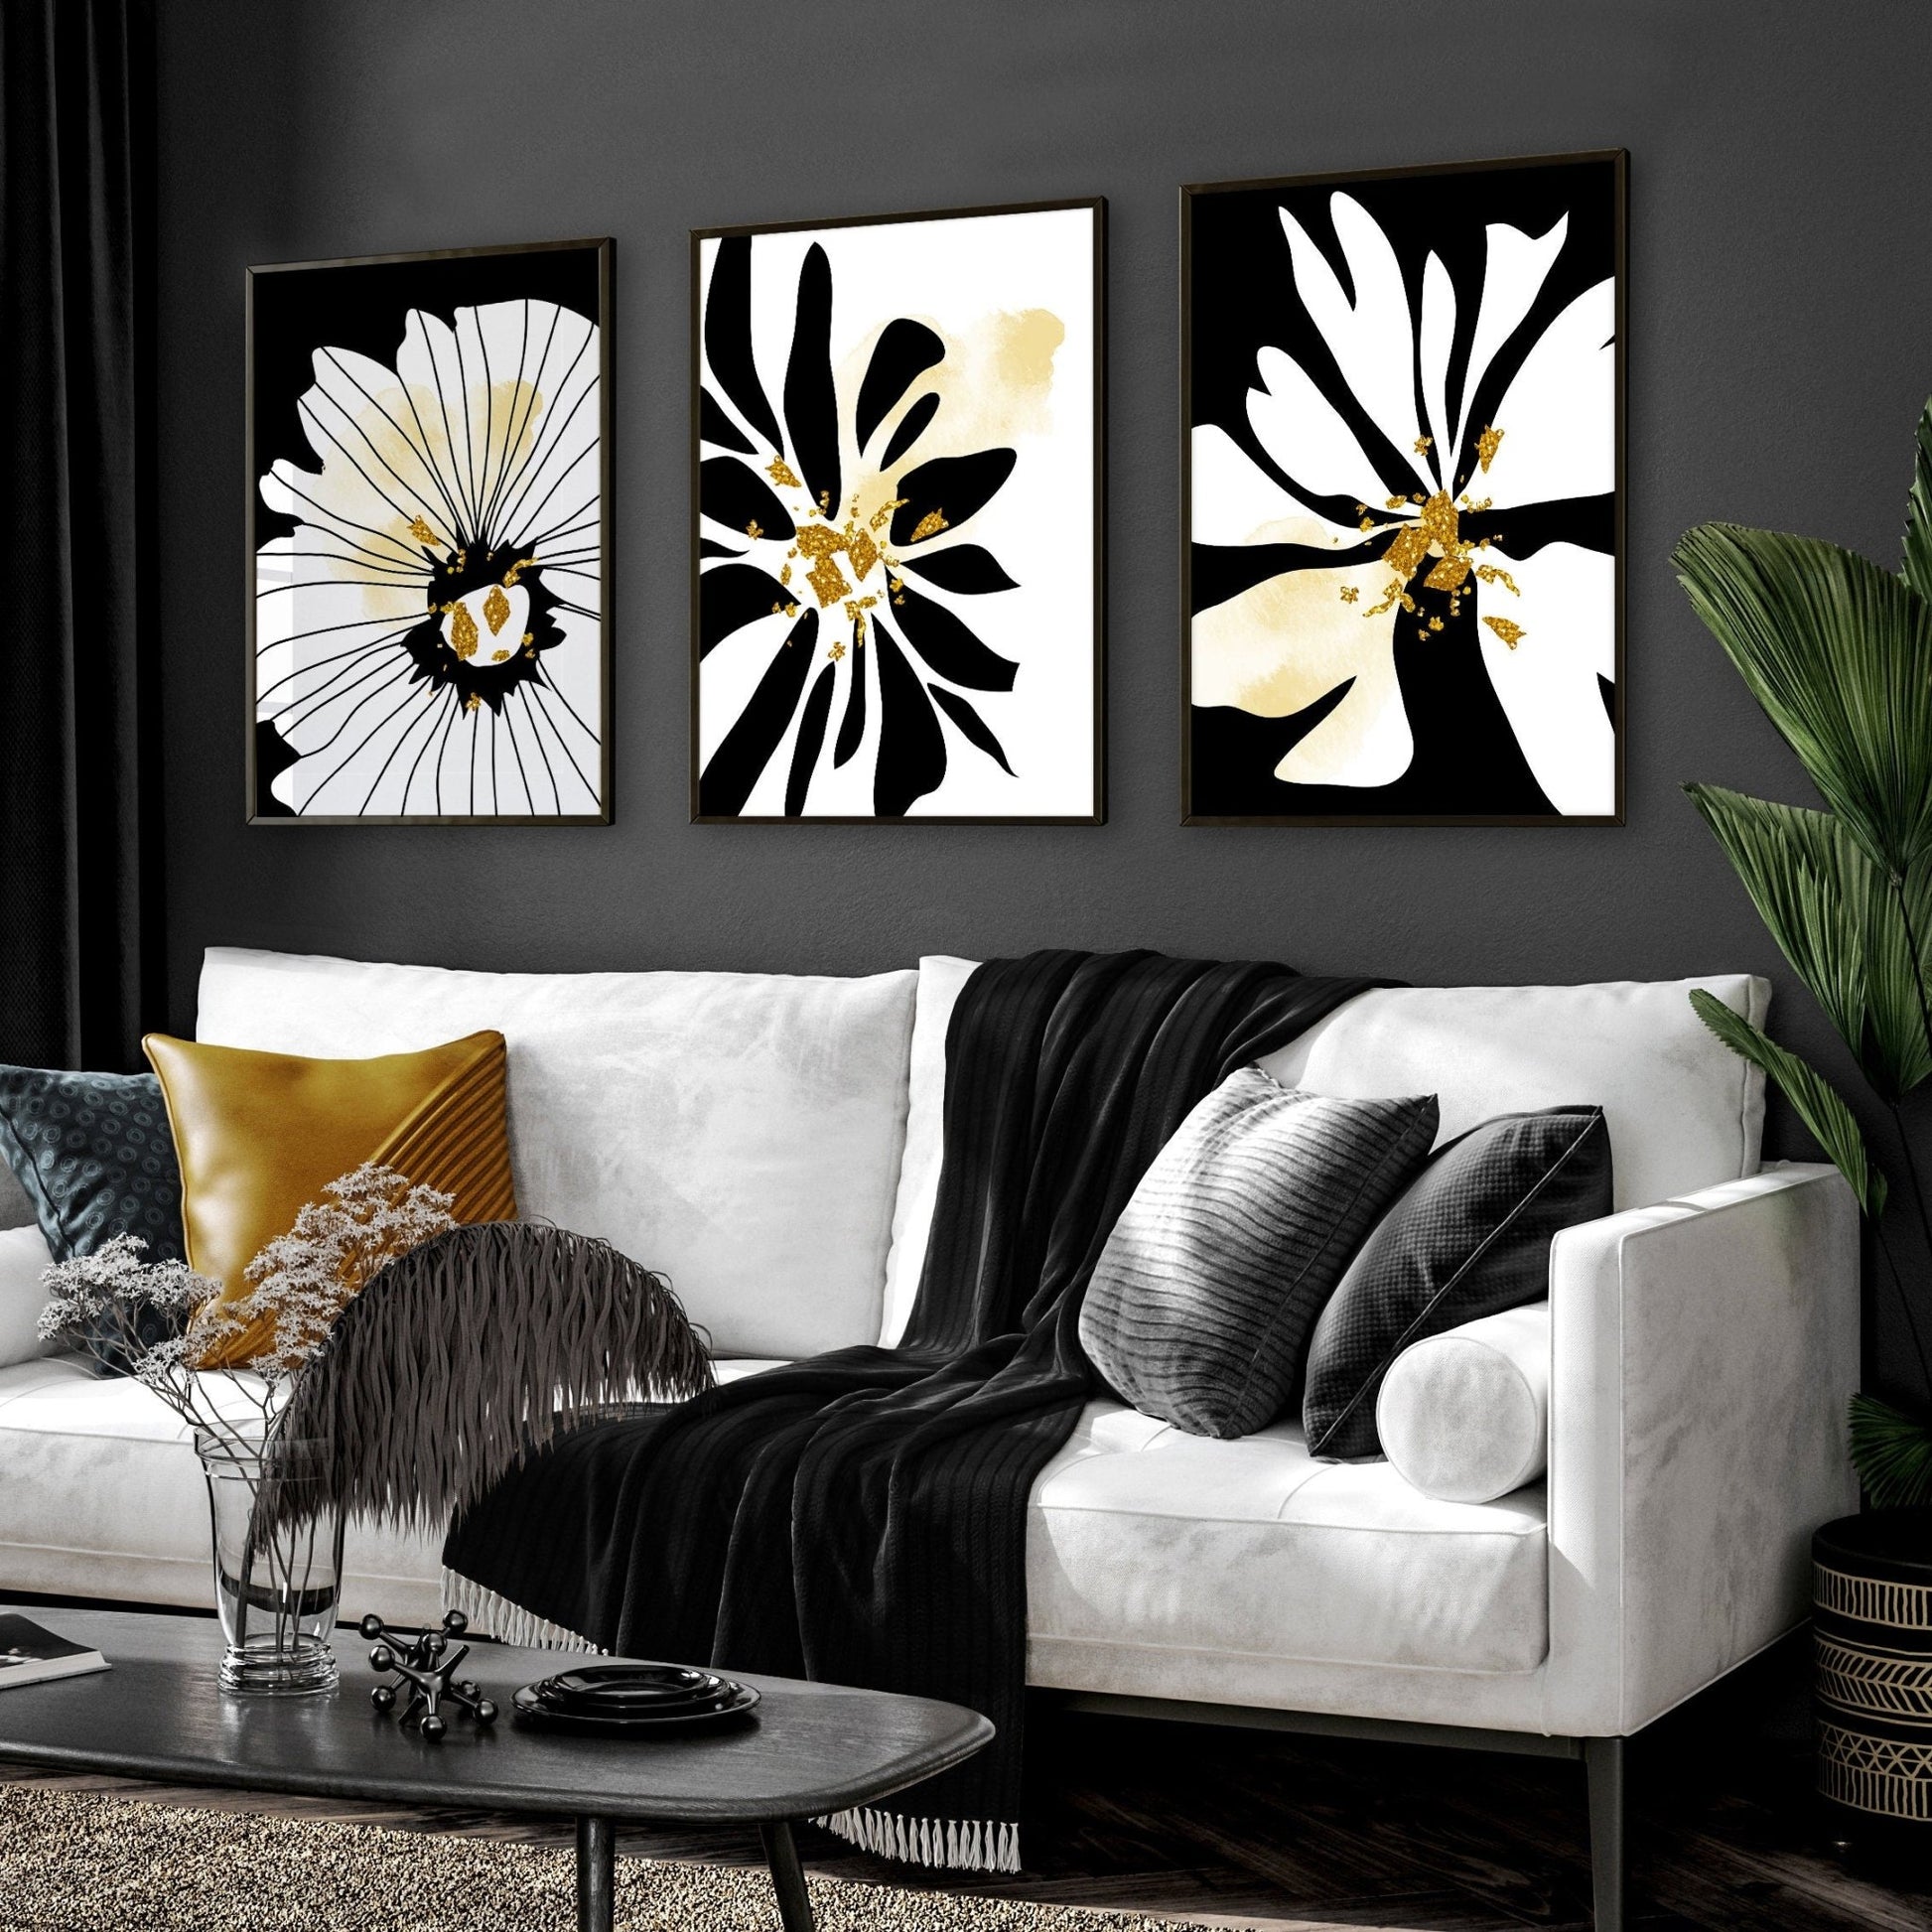 Black and white prints set of 3 | framed wall art prints - About Wall Art